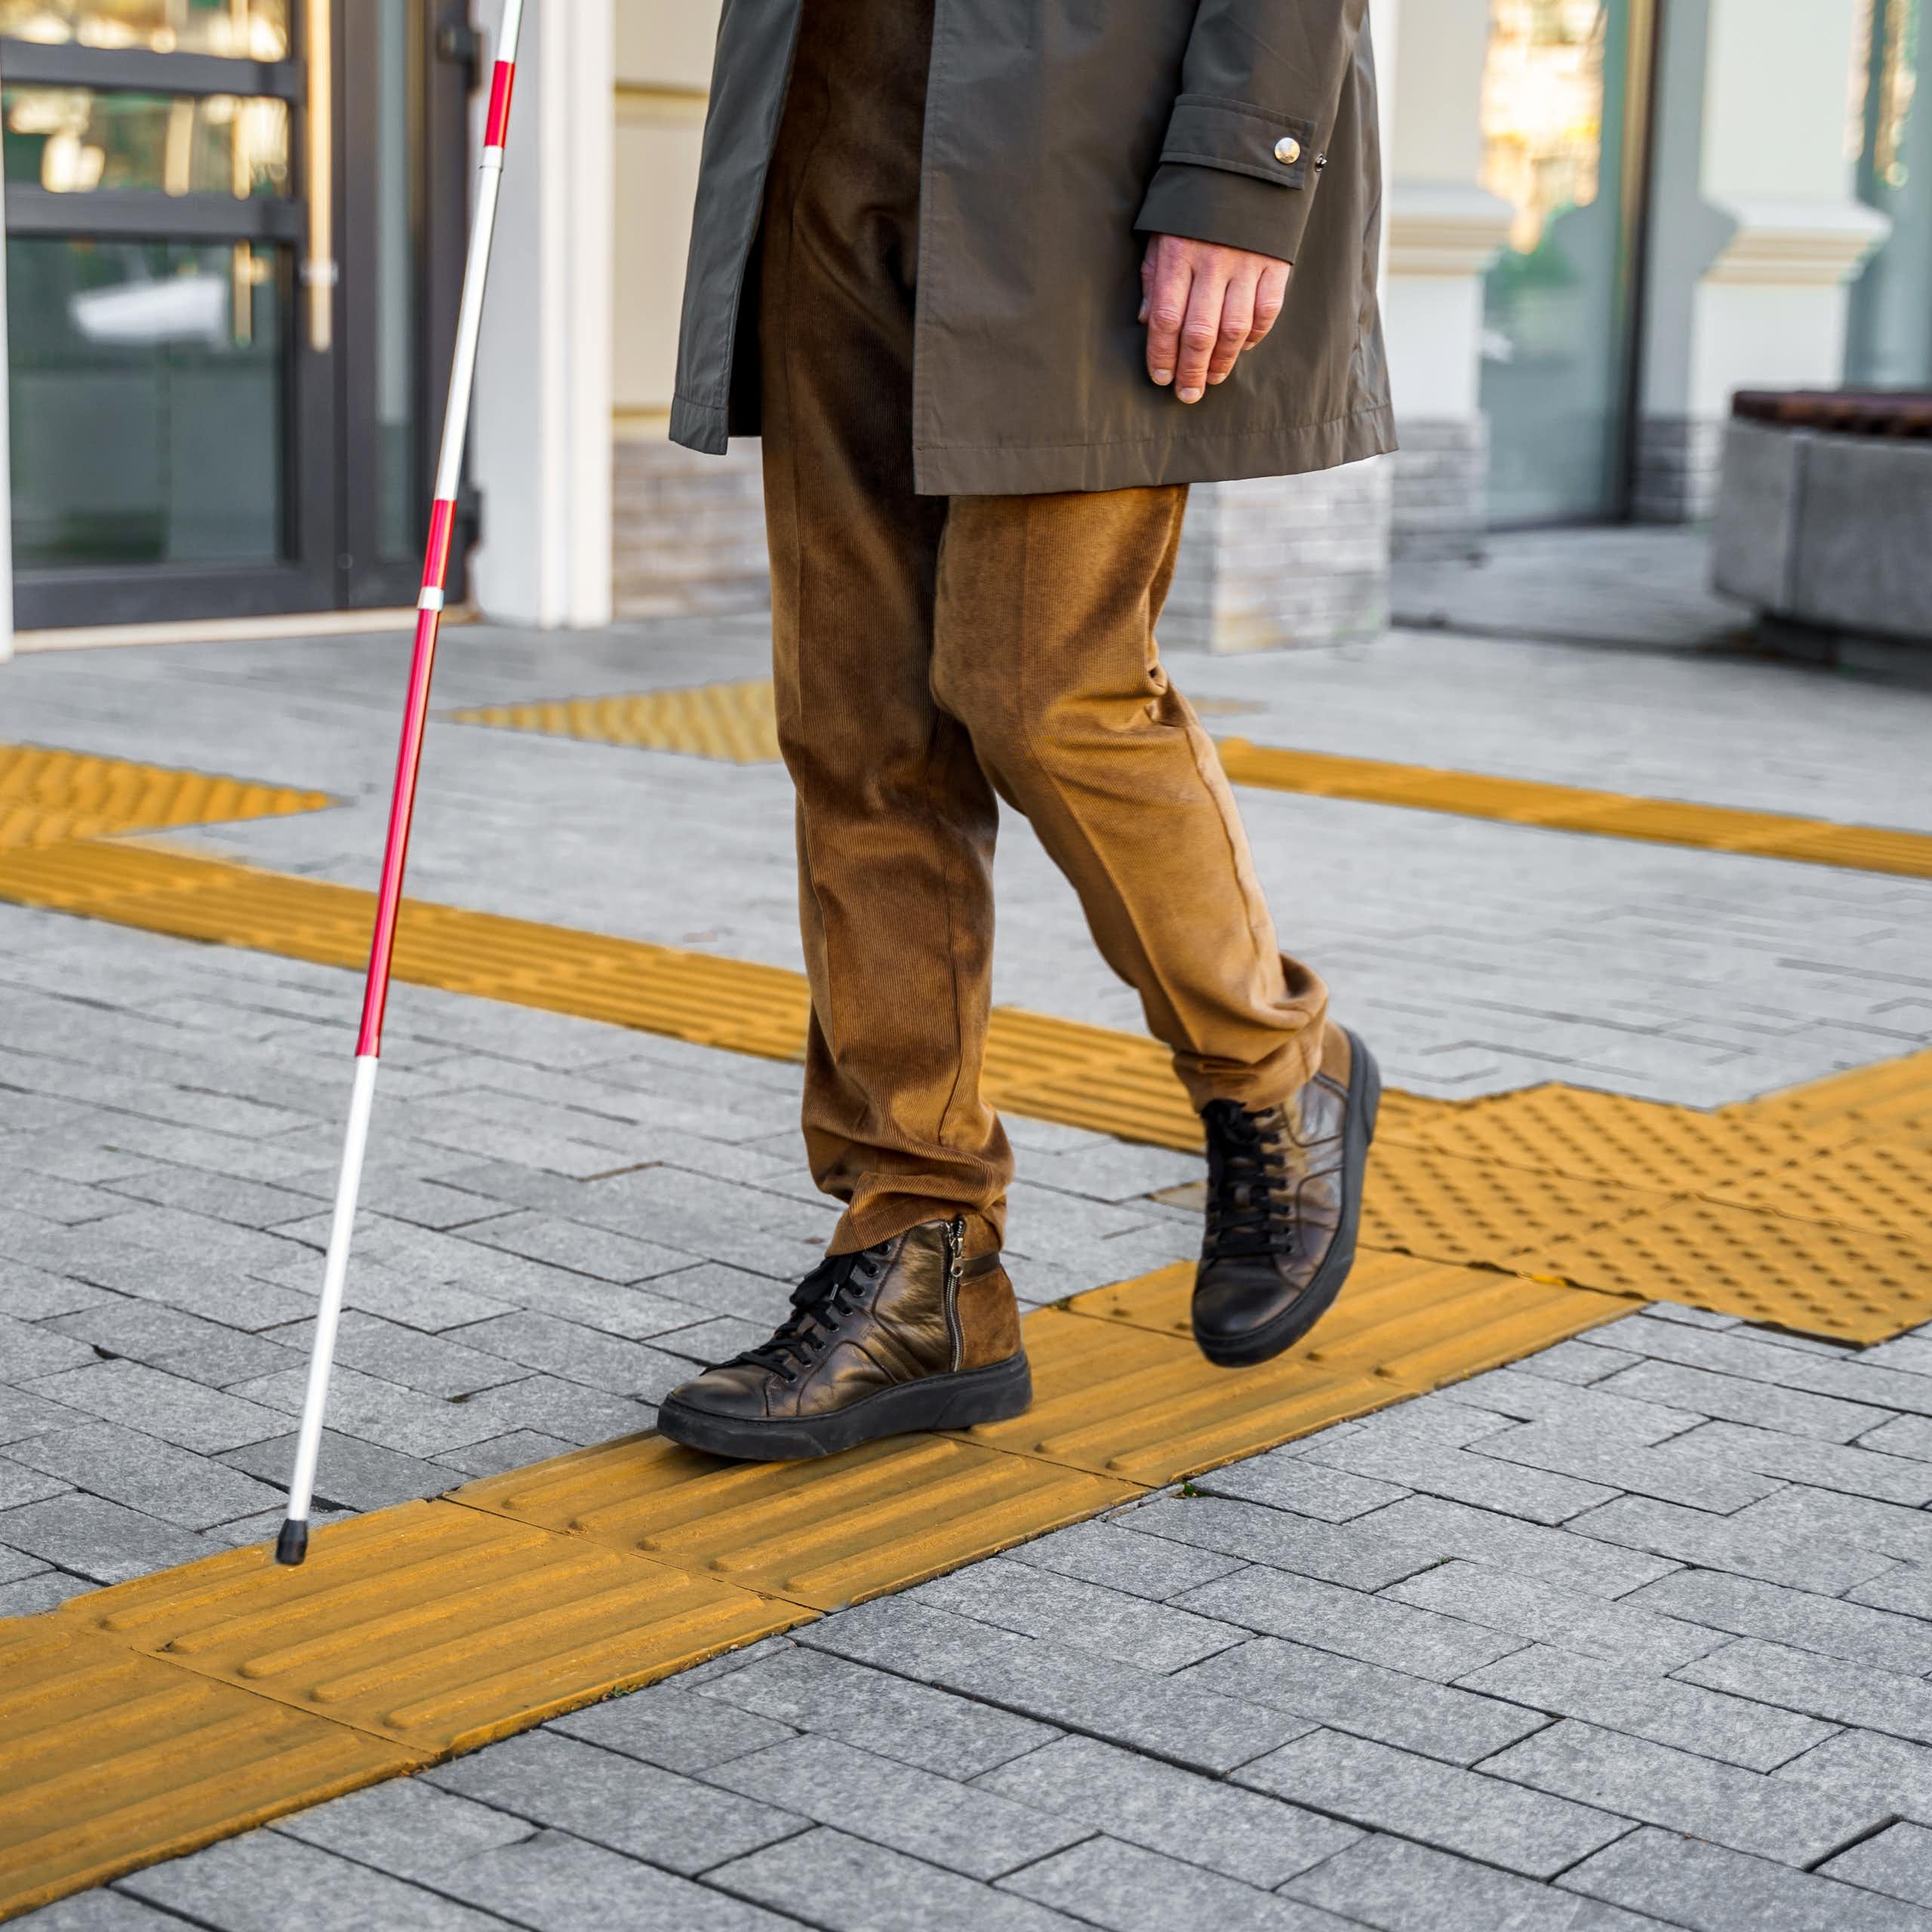 a man with a cane walks along a sidewalk with textured yellow surfaces